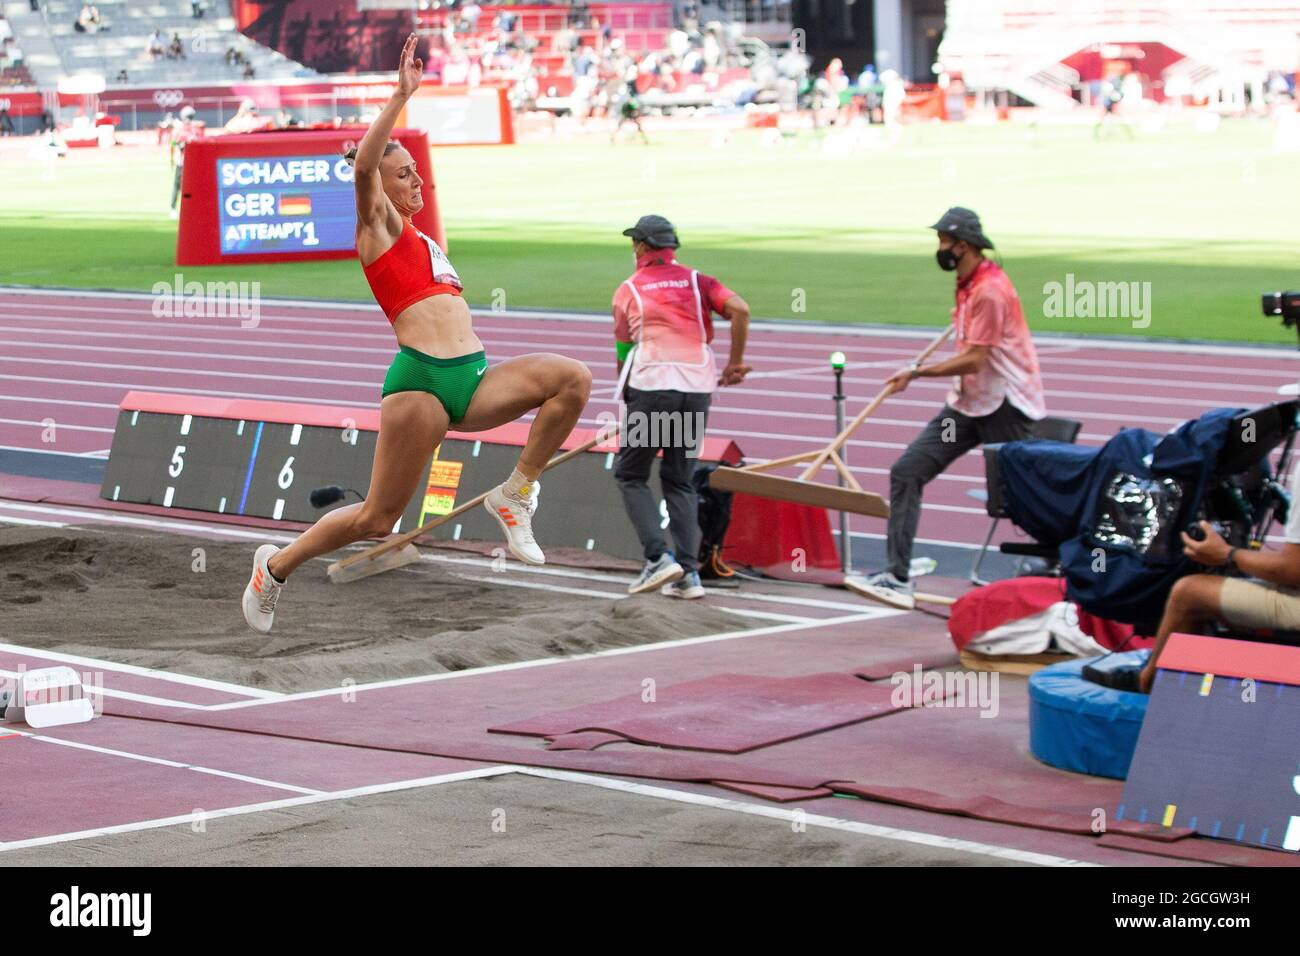 August 05, 2021: Xenia Krizsan (2267) of Hungary during Women's Heptathlon Long Jump event during Athletics competition at Olympic Stadium in Tokyo, Japan. Daniel Lea/CSM} Stock Photo